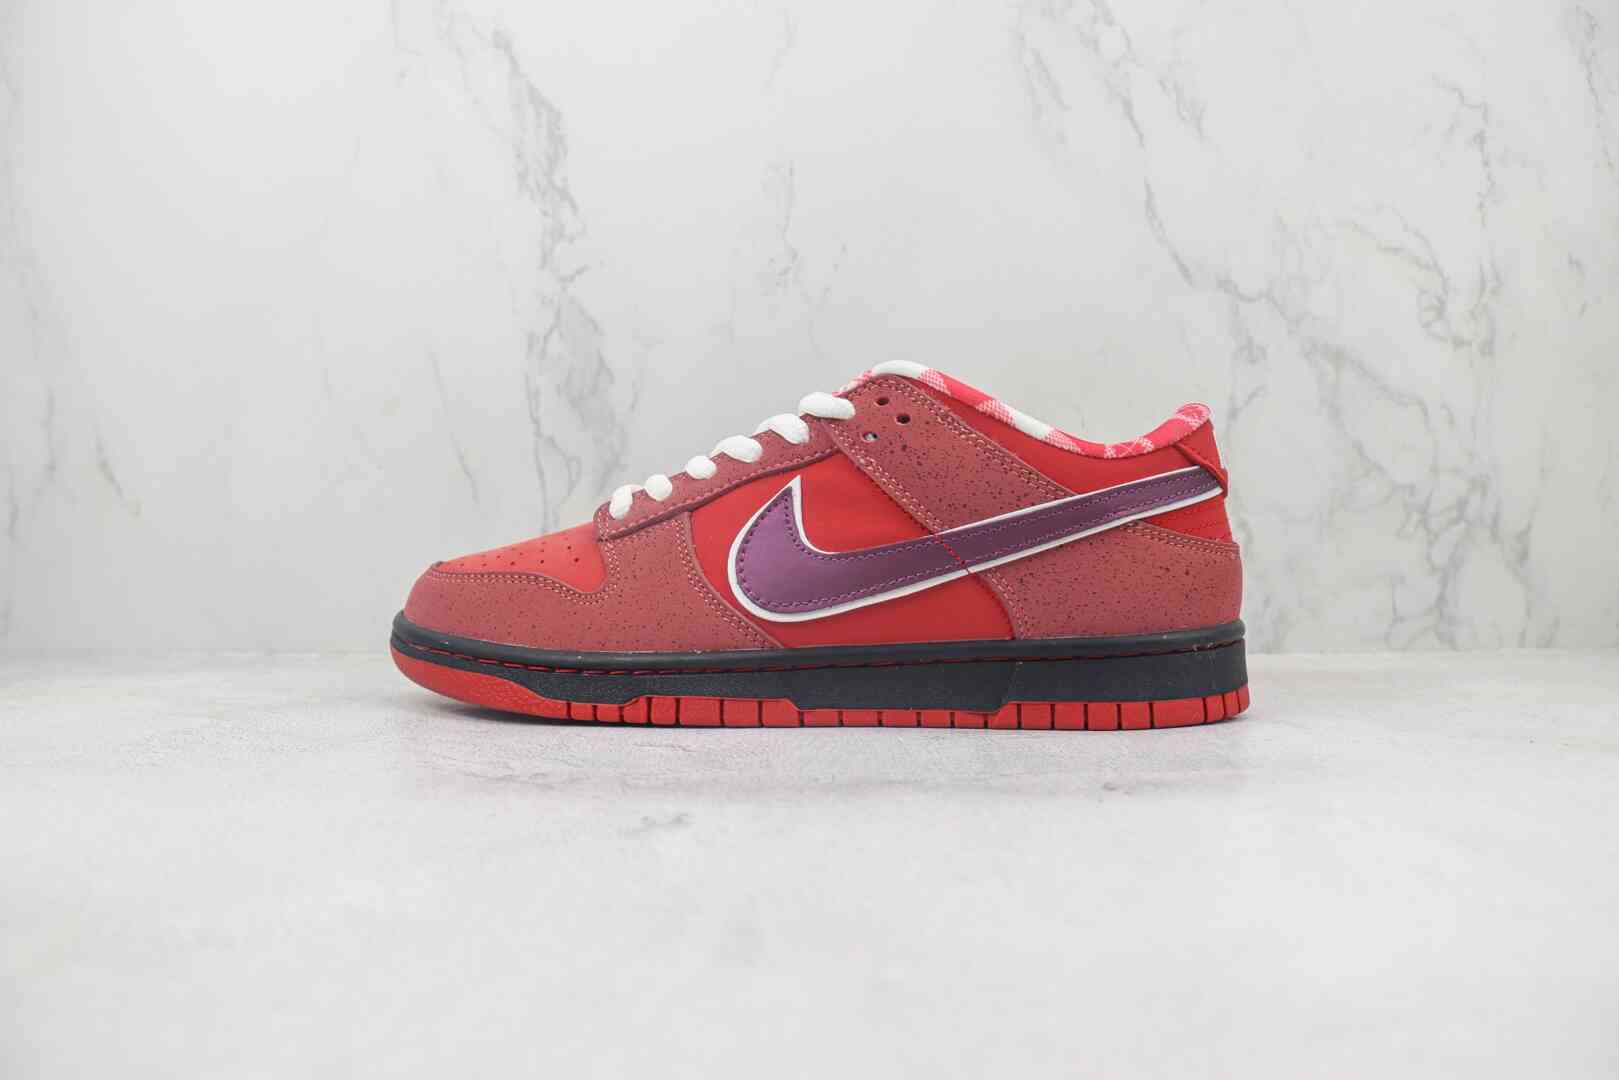 Concepts x Nike SB Dunk Low “Red Lobster” 联名 红龙虾 313170-661